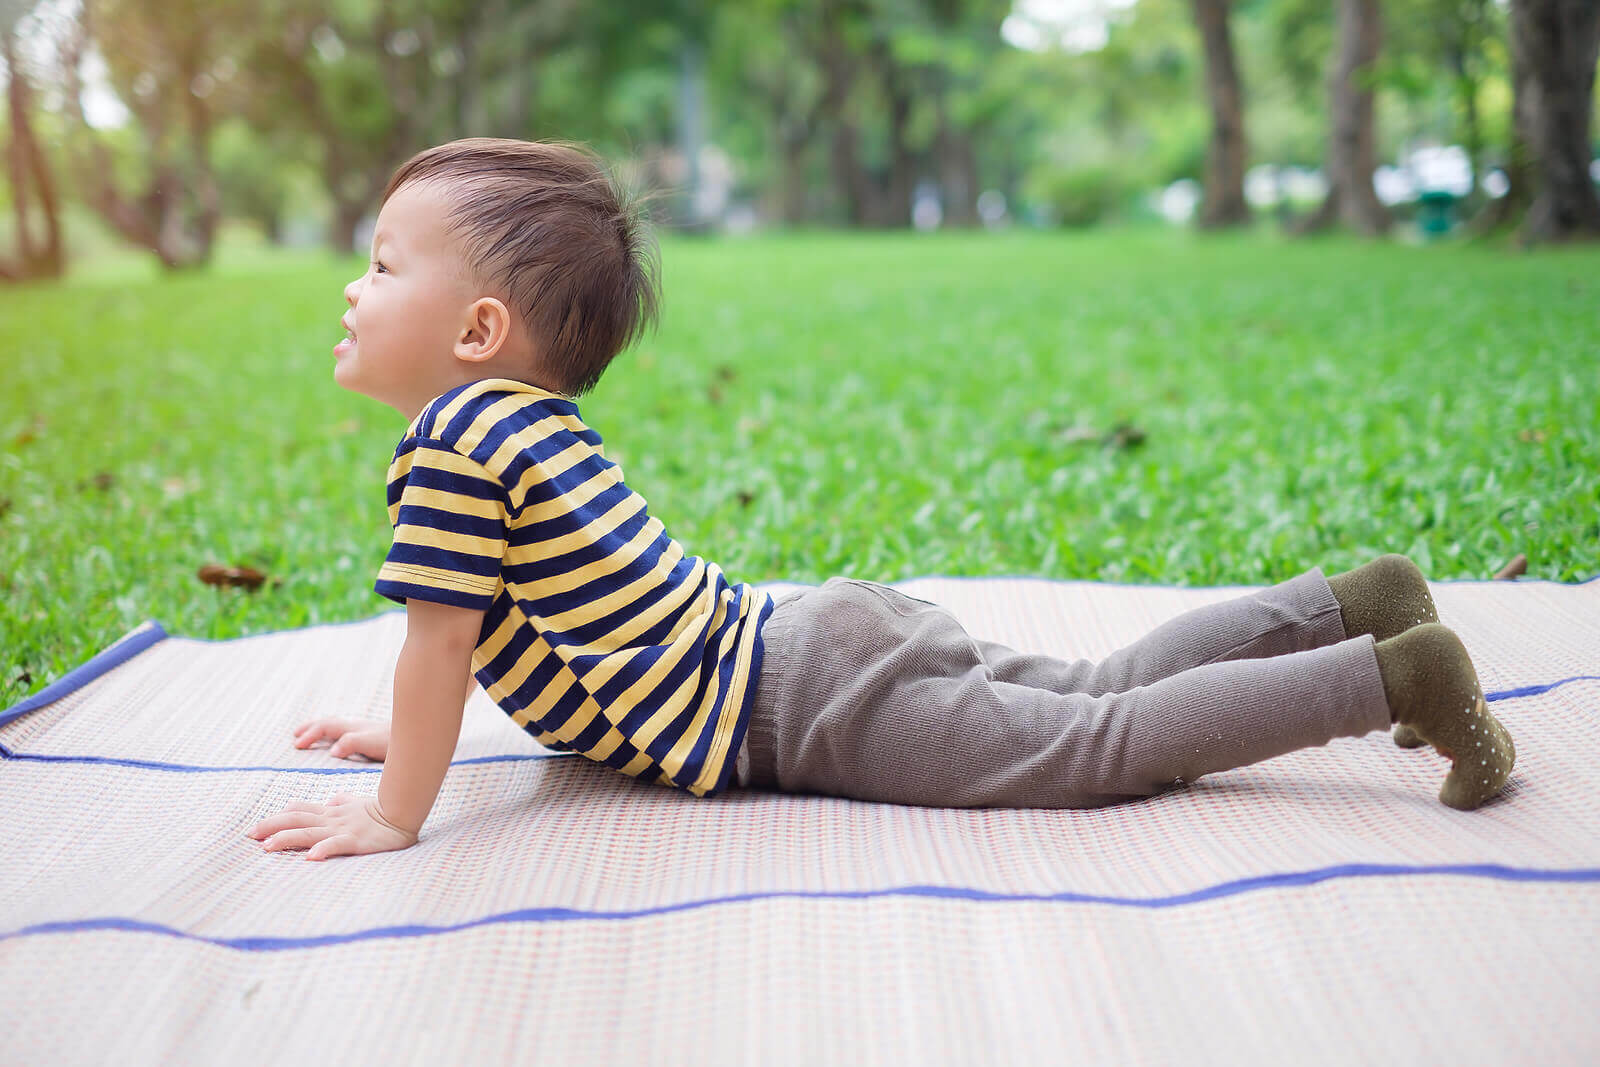 The Best Relaxation Techniques for Children, According to Age